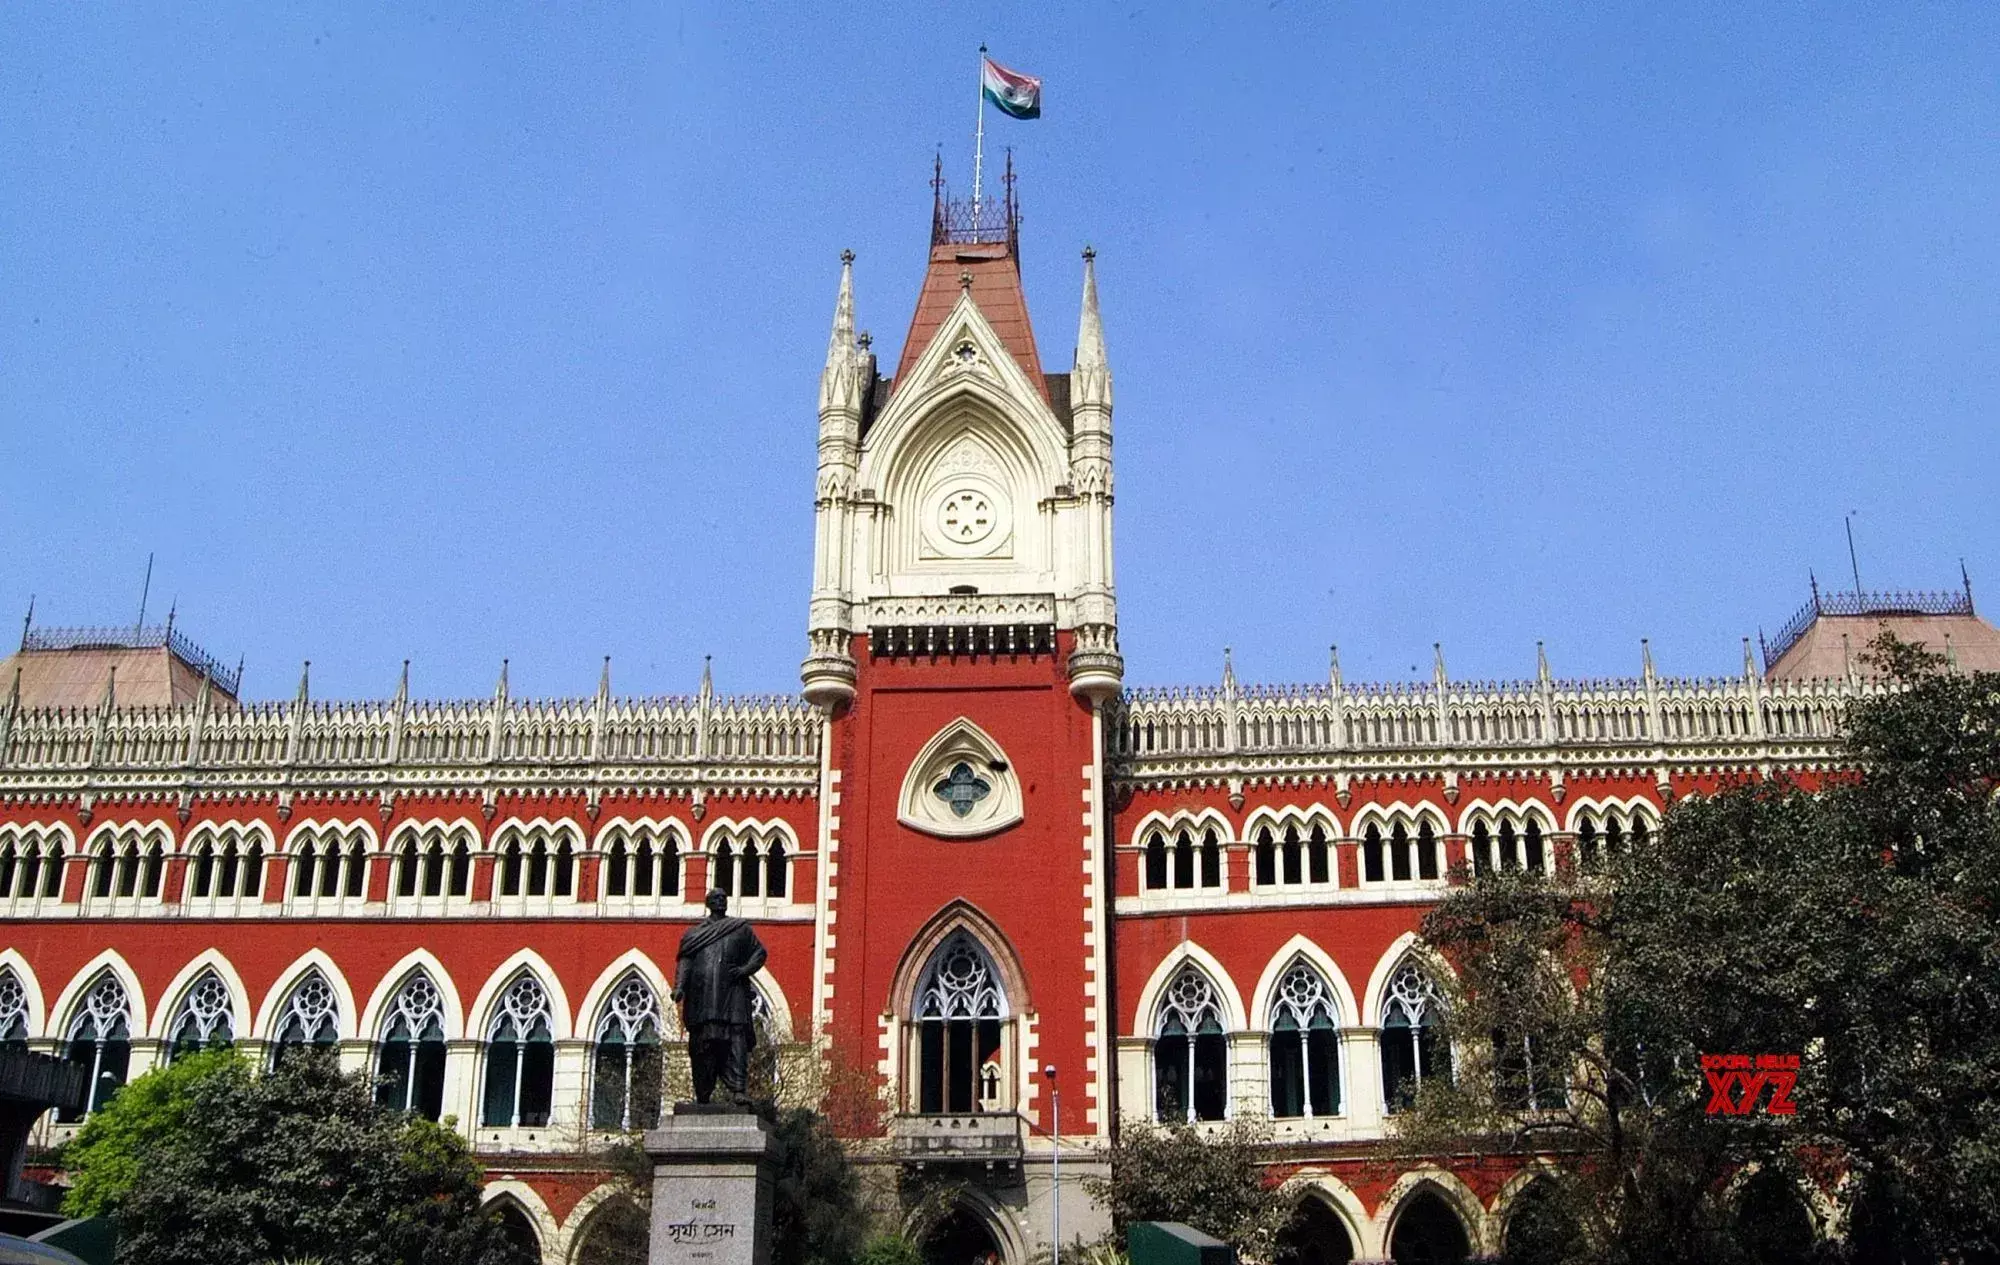 Opposition move Calcutta High Court seeking deployment of Central forces in panchayat polls